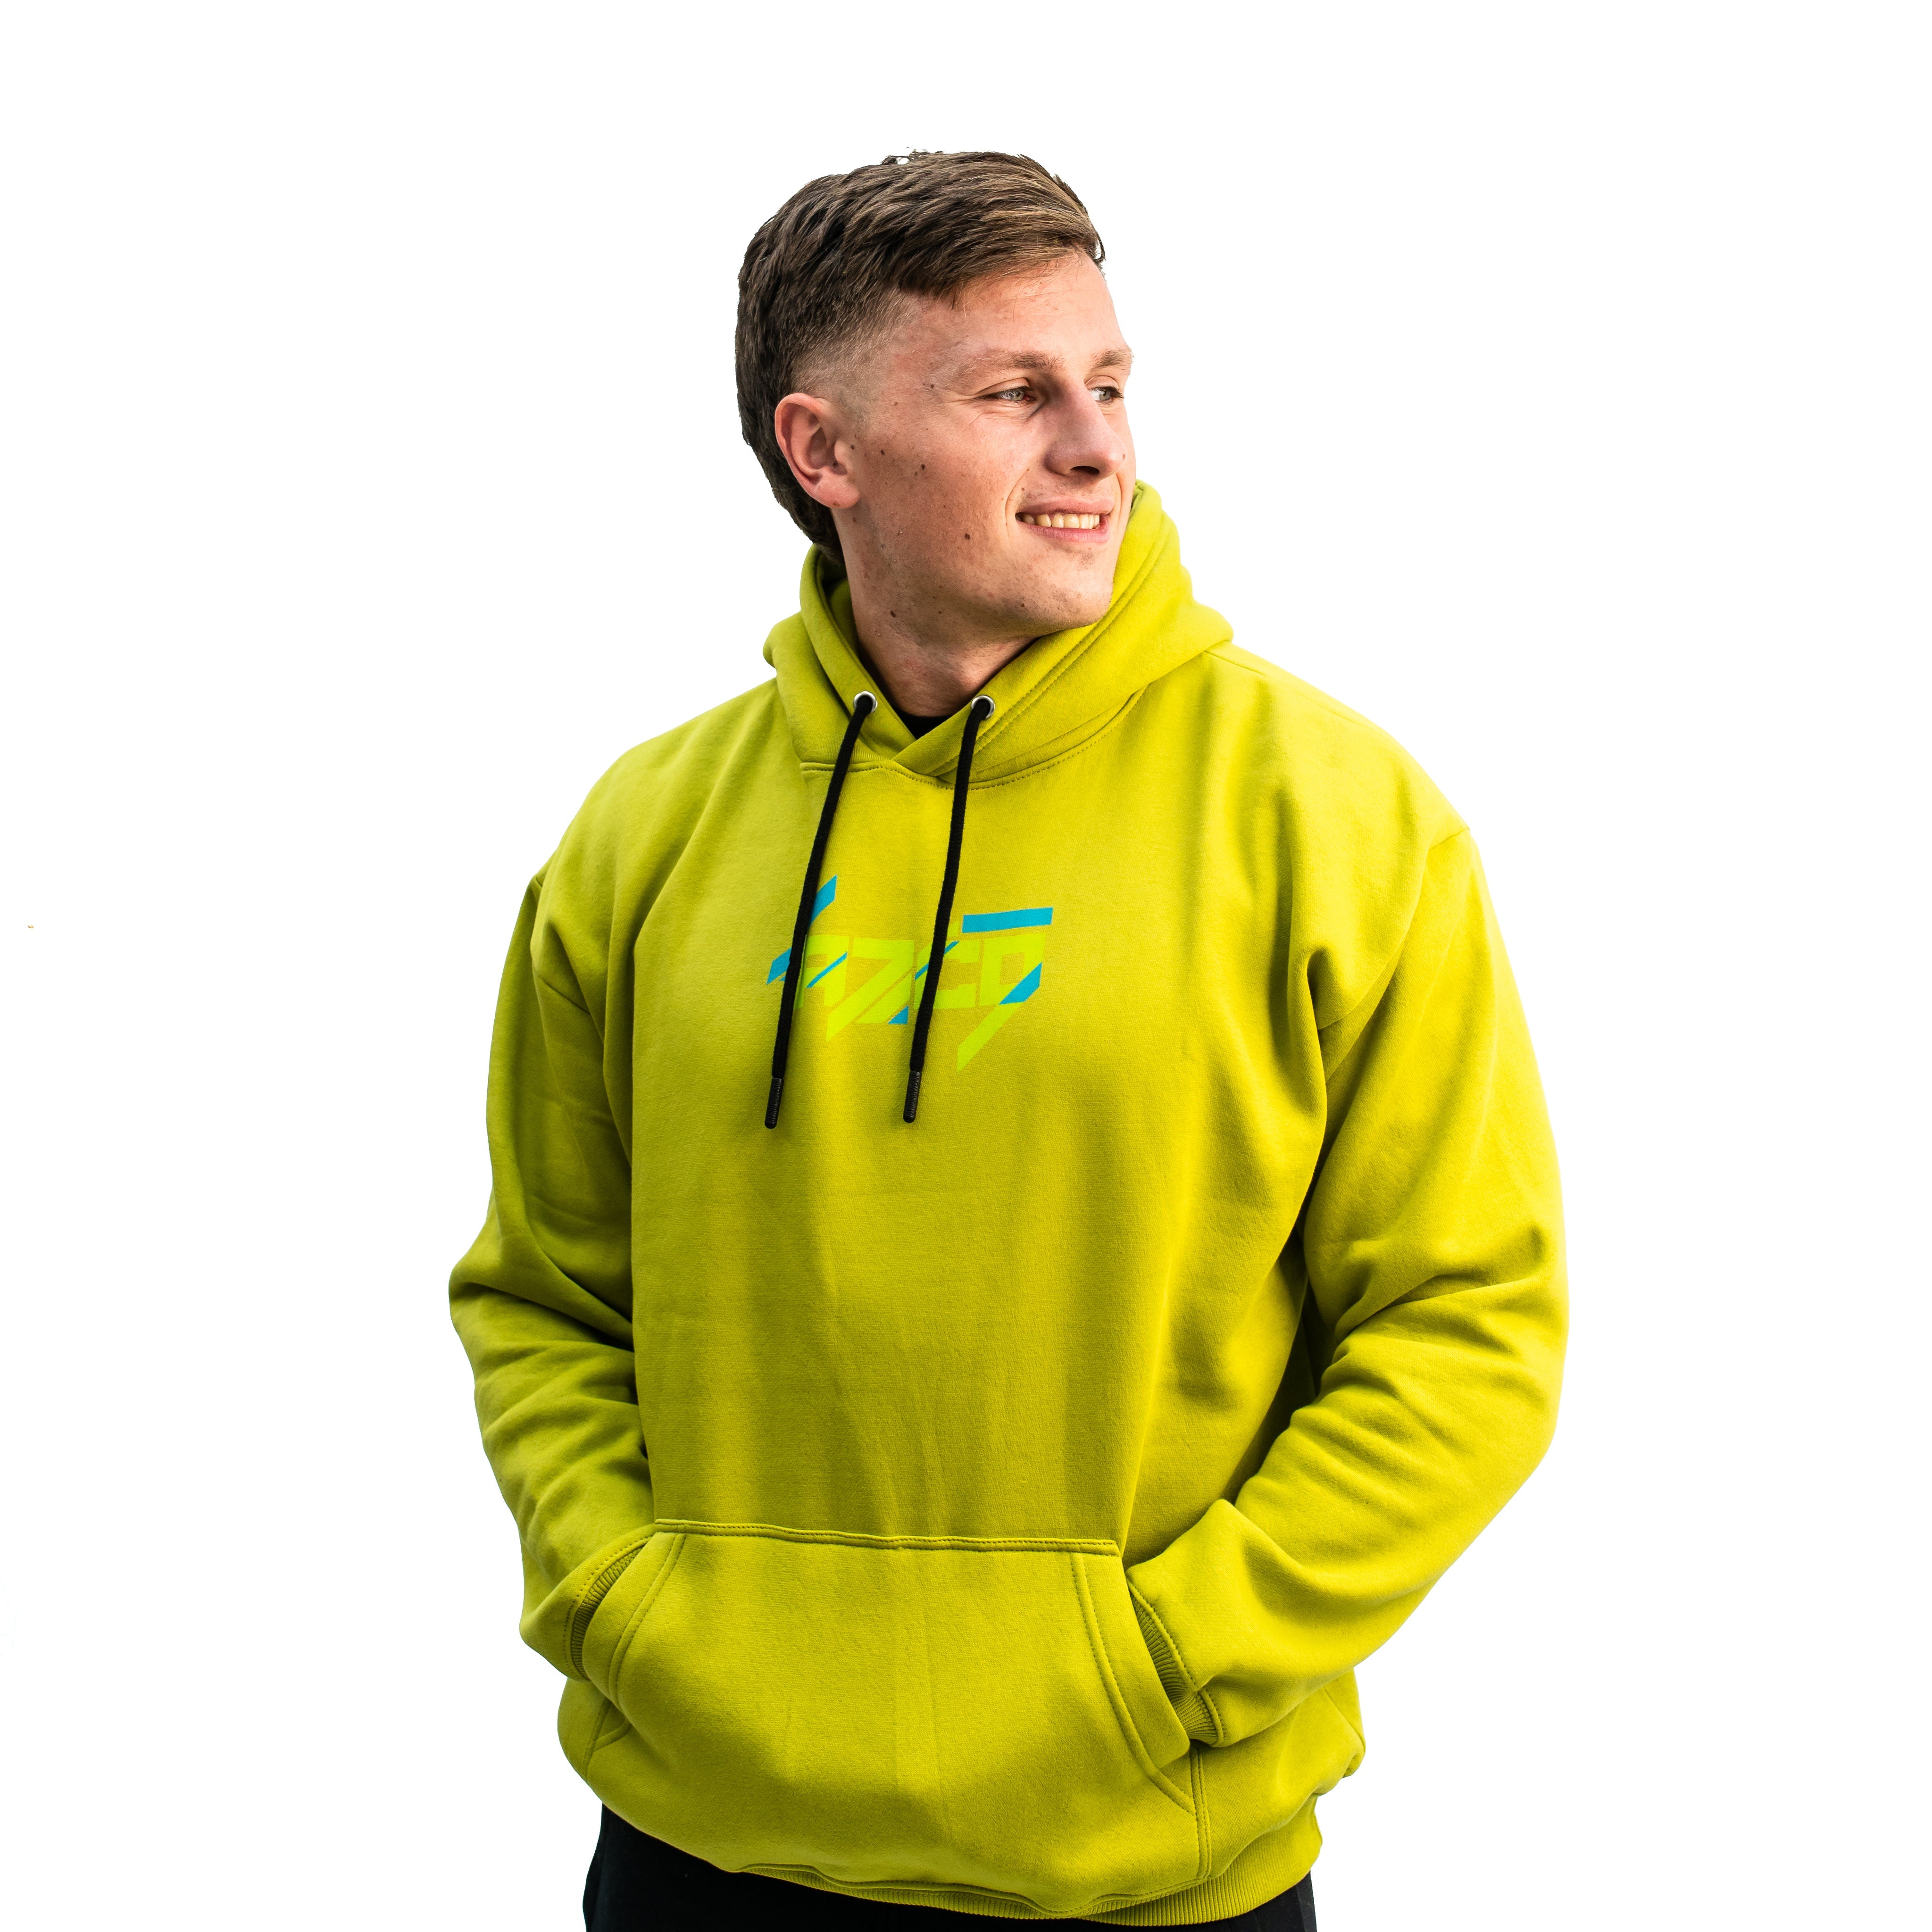 Live The Barbell extends past your gym experience. Our LTB Collection is centered around the idea of evolving and treating your life like a barbell in your hand - being able to carry heavier weight on your shoulders and becoming stronger every day. LTB Hinge reminds us of this lifestyle in a colourful lime green colourway. A7UK supplies the best Powerlifting apparel for all your workouts. Available in UK and Europe including France, Italy, Germany, the Netherlands, Sweden and Poland.